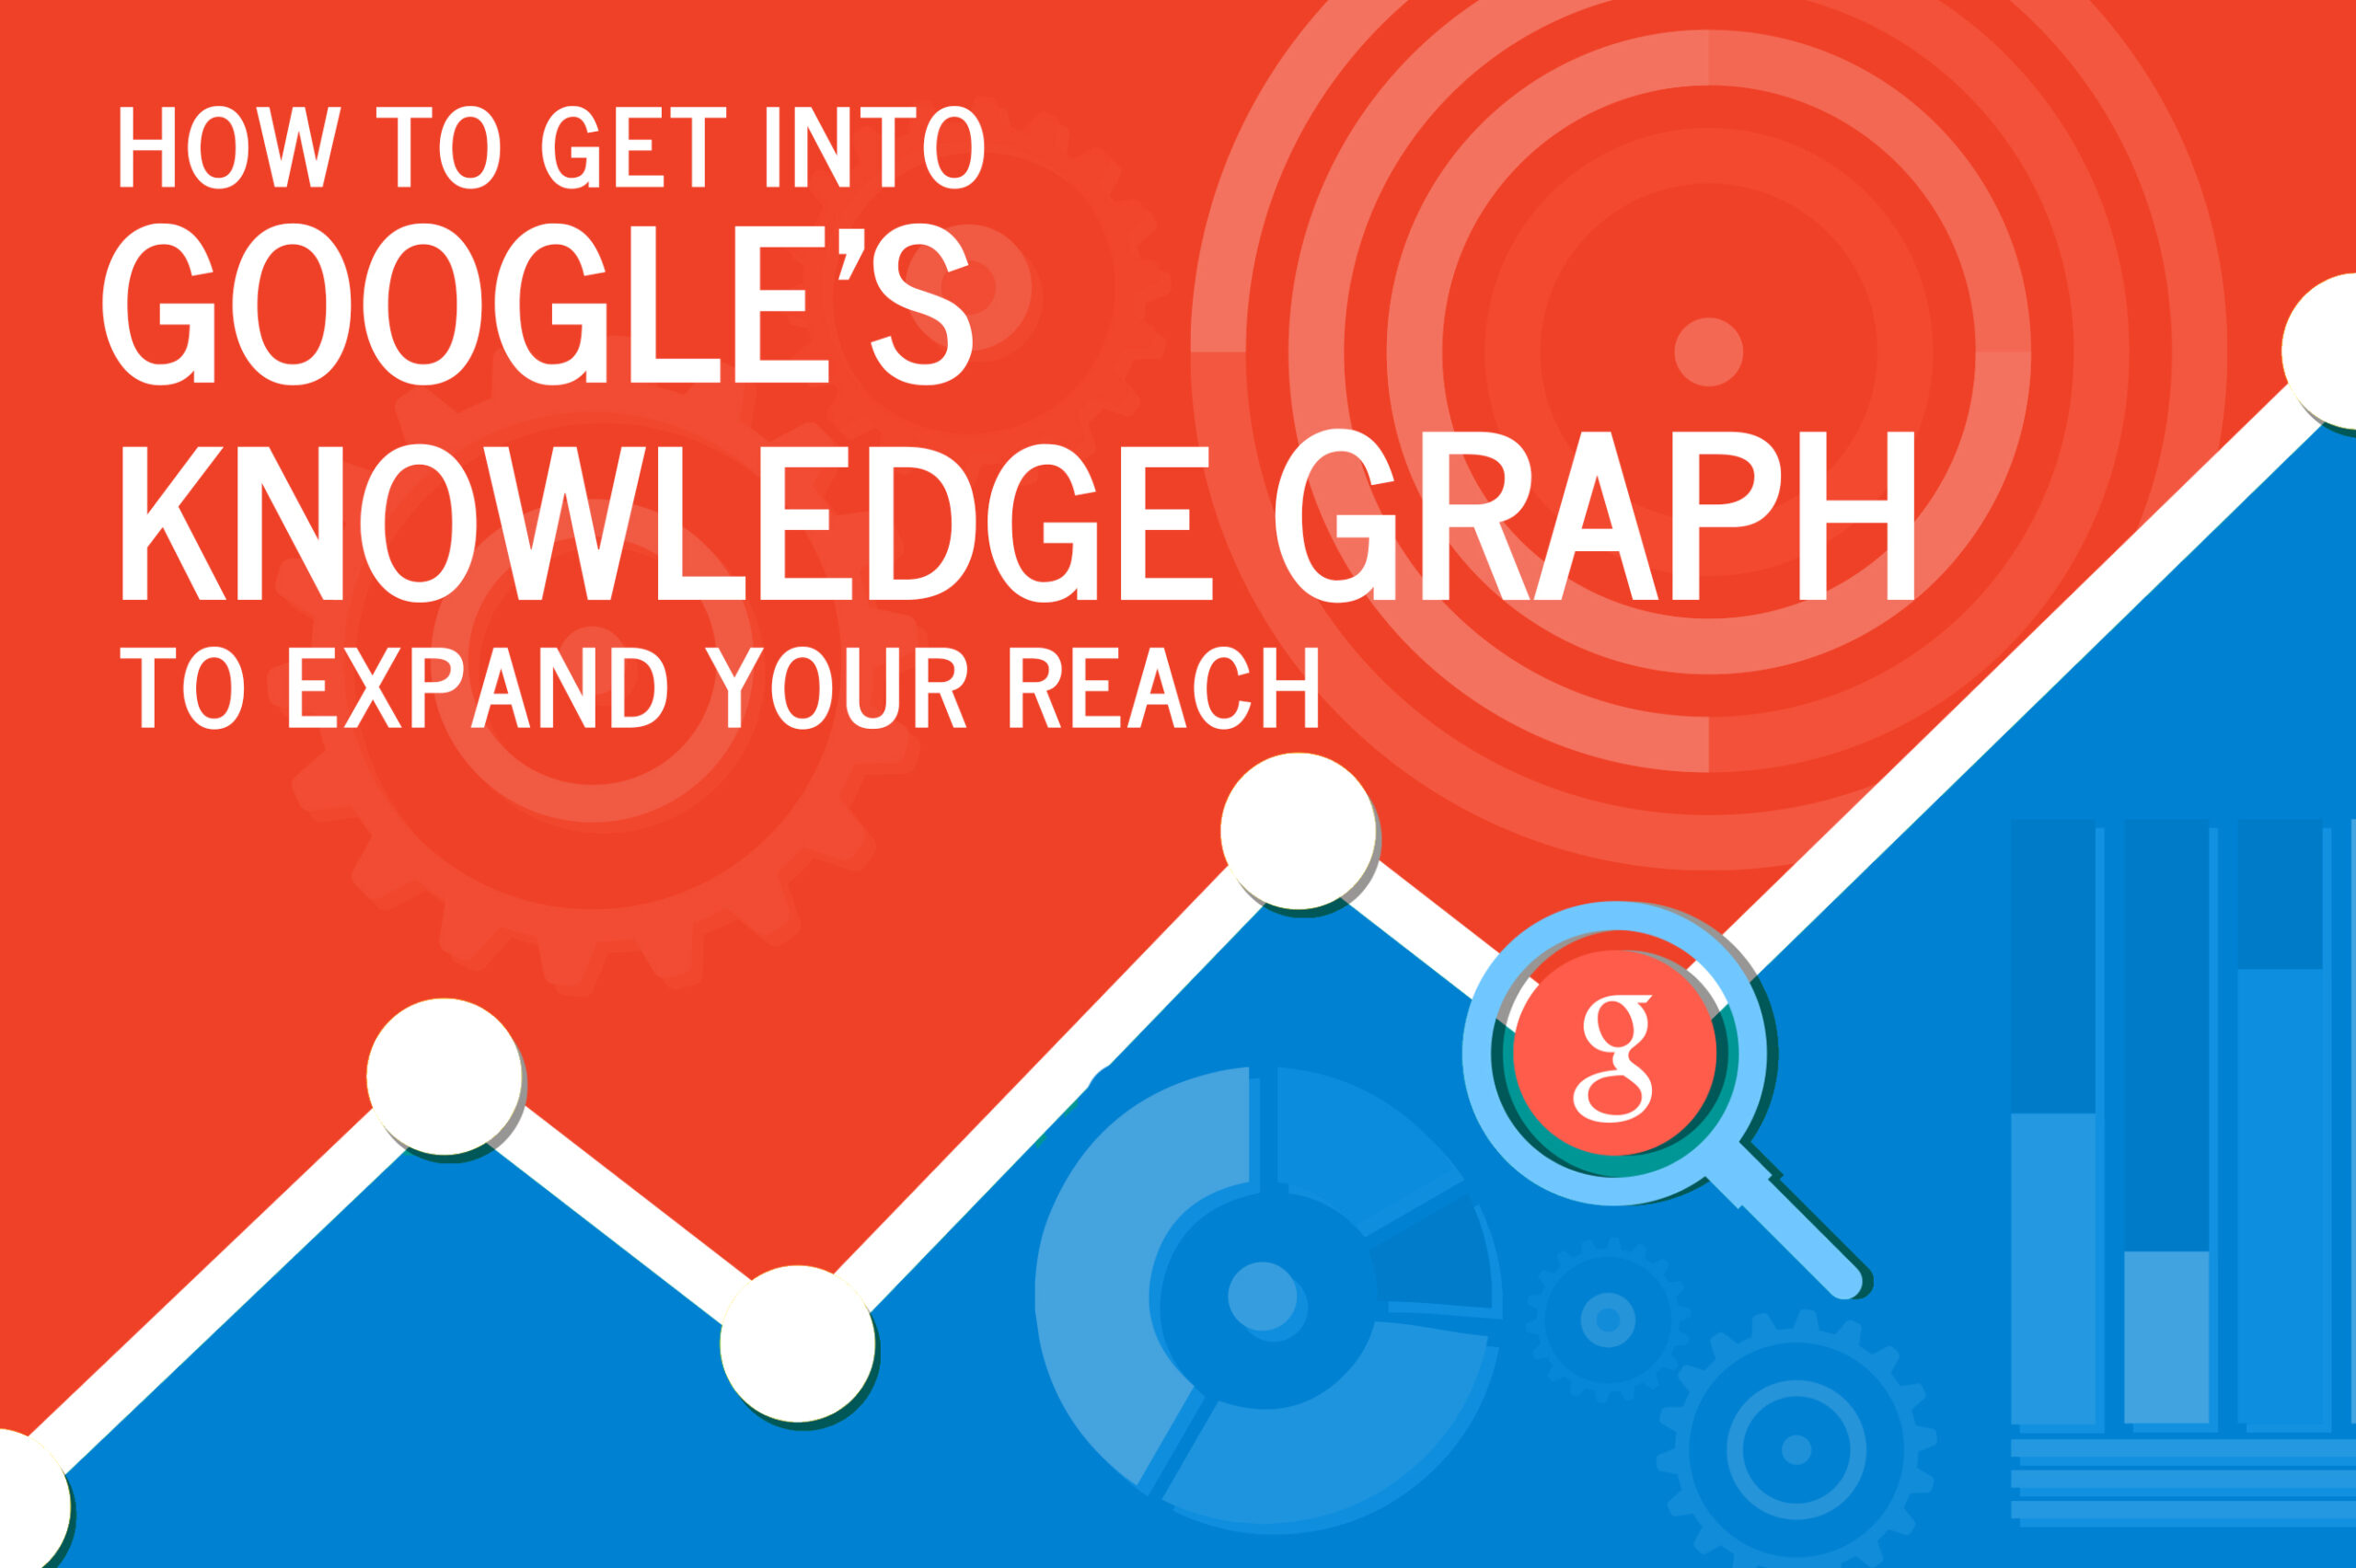 https://www.ilfusion.com/how-to-get-into-googles-knowledge-graph-to-expand-your-reach